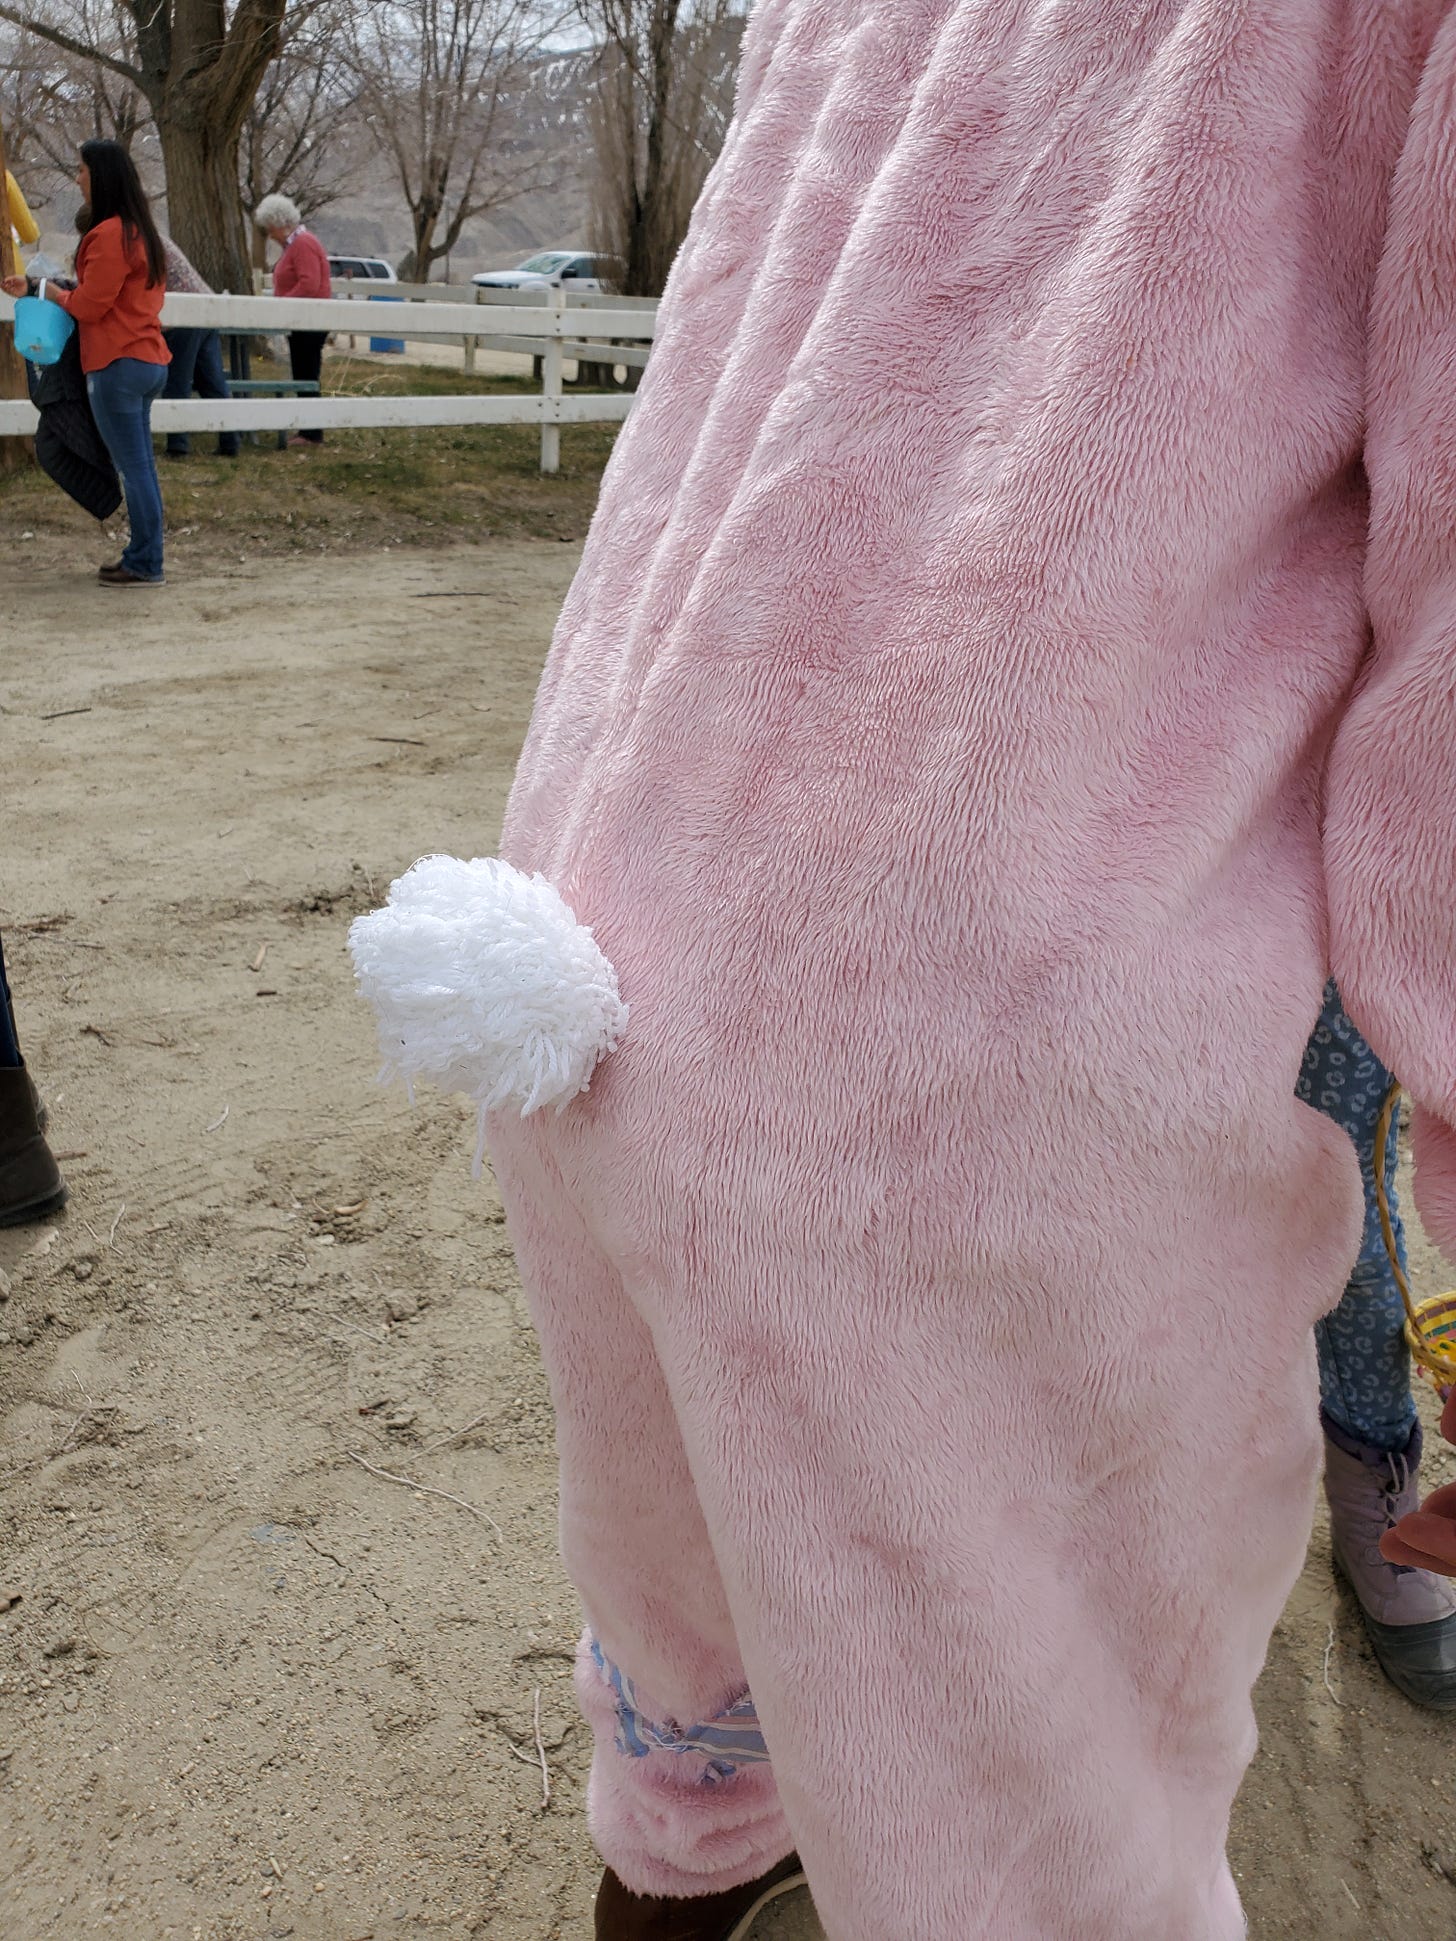 Eric's butt in a pink bunny costume with a white fluffy tail.